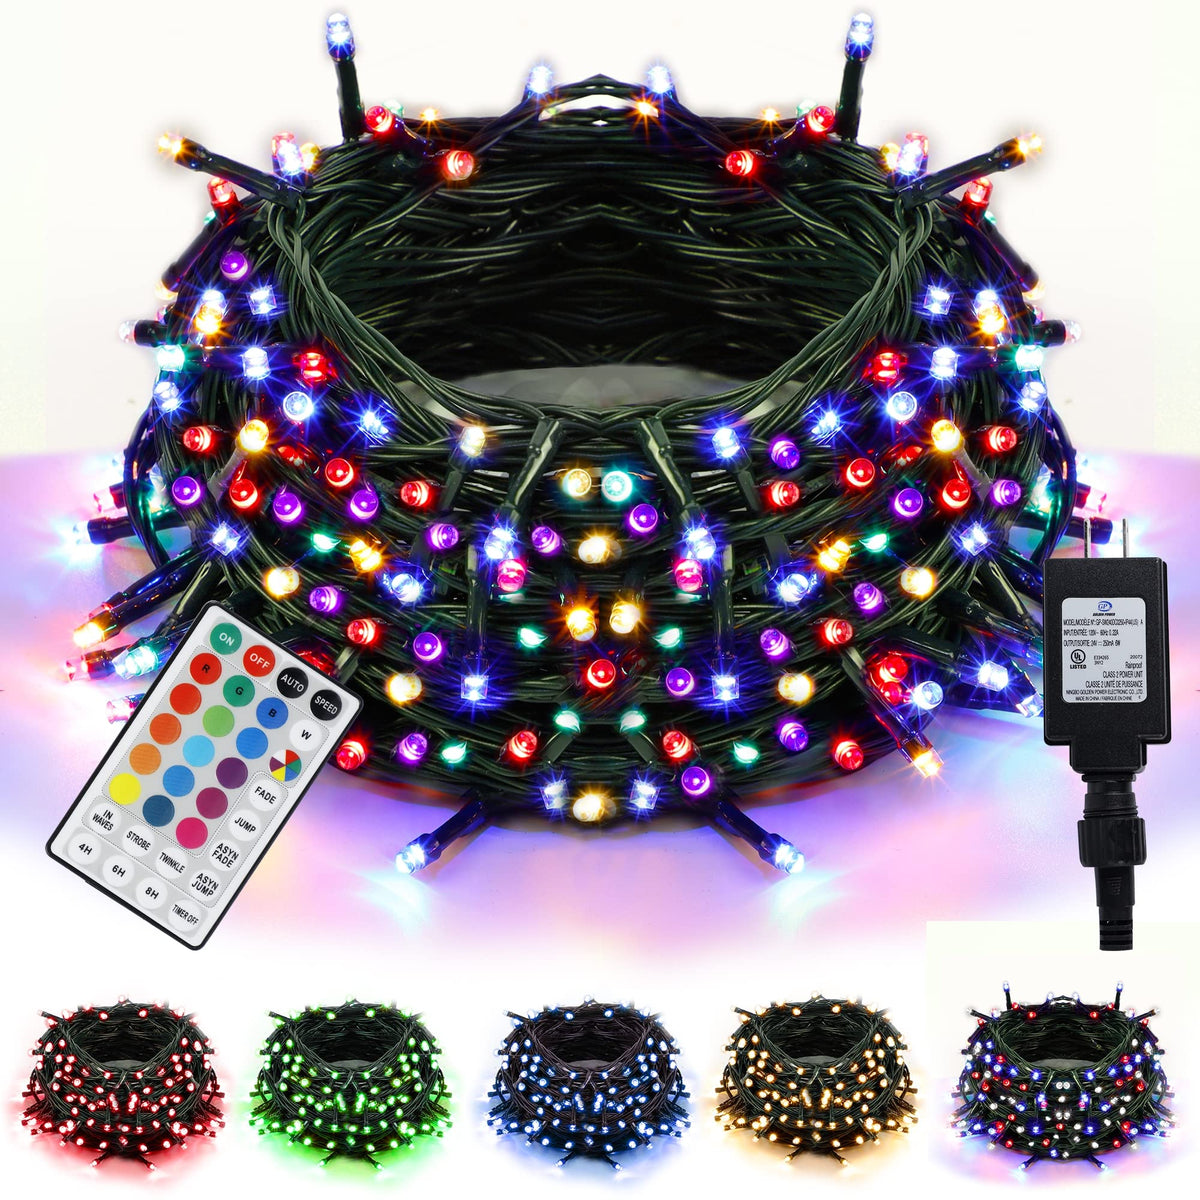 Twinkle Star Christmas String Lights, 66ft 200 LED Color Changing Tree  Light Plug in 11 Modes Functions Warm White & Multicolor with Remote Timer,  Connectable for Outdoor Indoor Xmas Party Decorations 